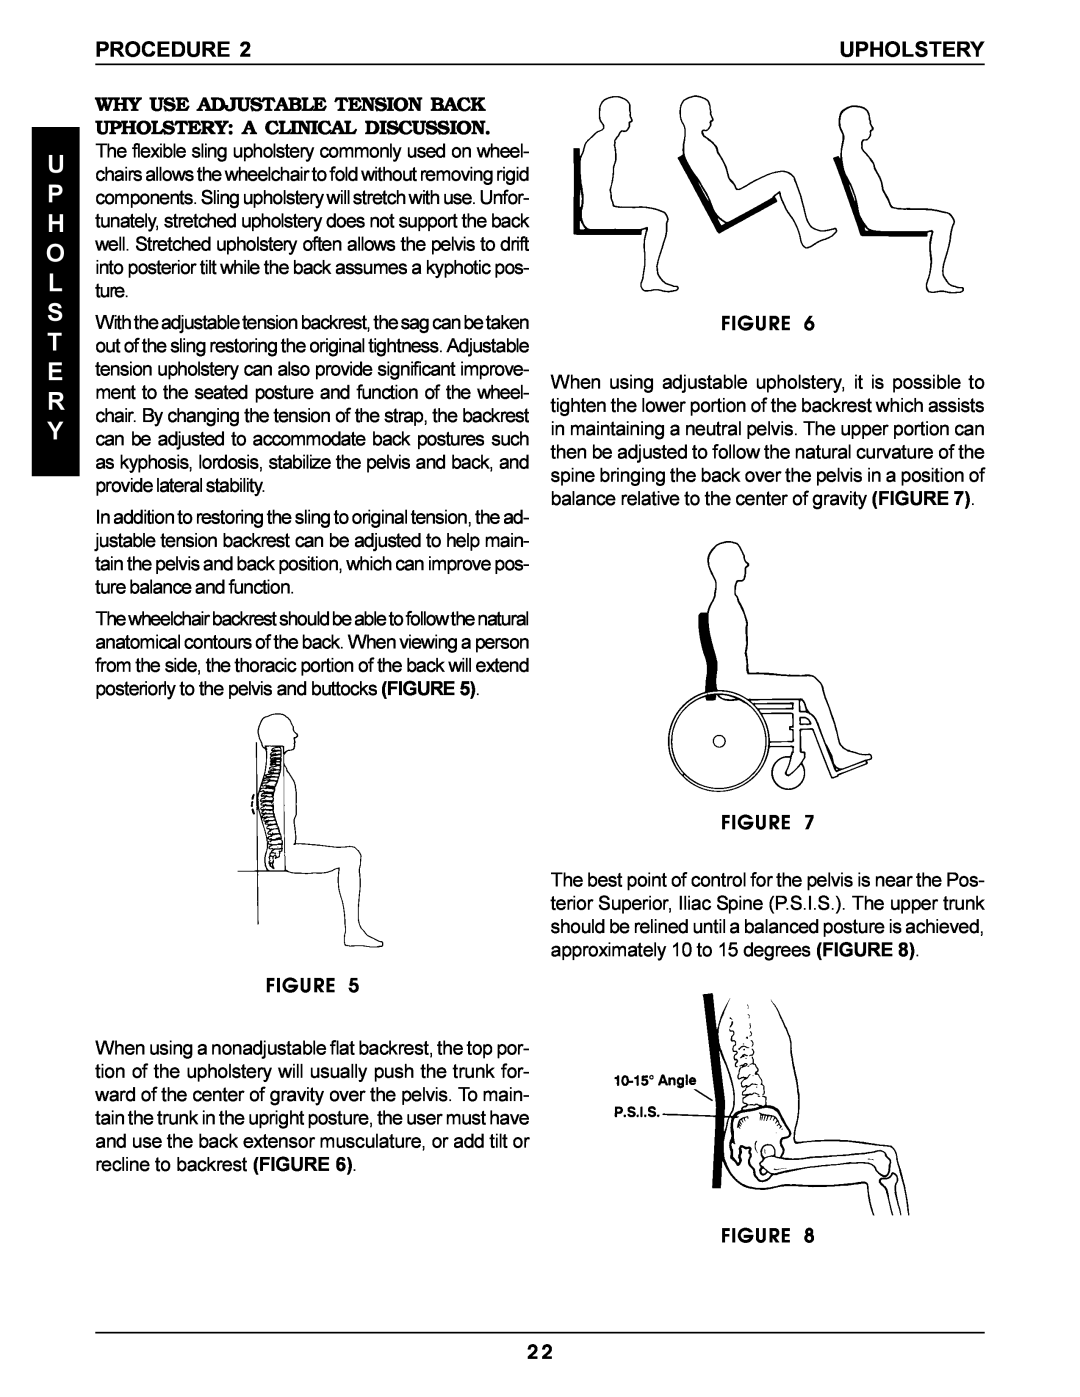 Invacare Pro Series manual Why Use Adjustable Tension Back, U P H O L S T E R Y, Procedure, Upholstery 